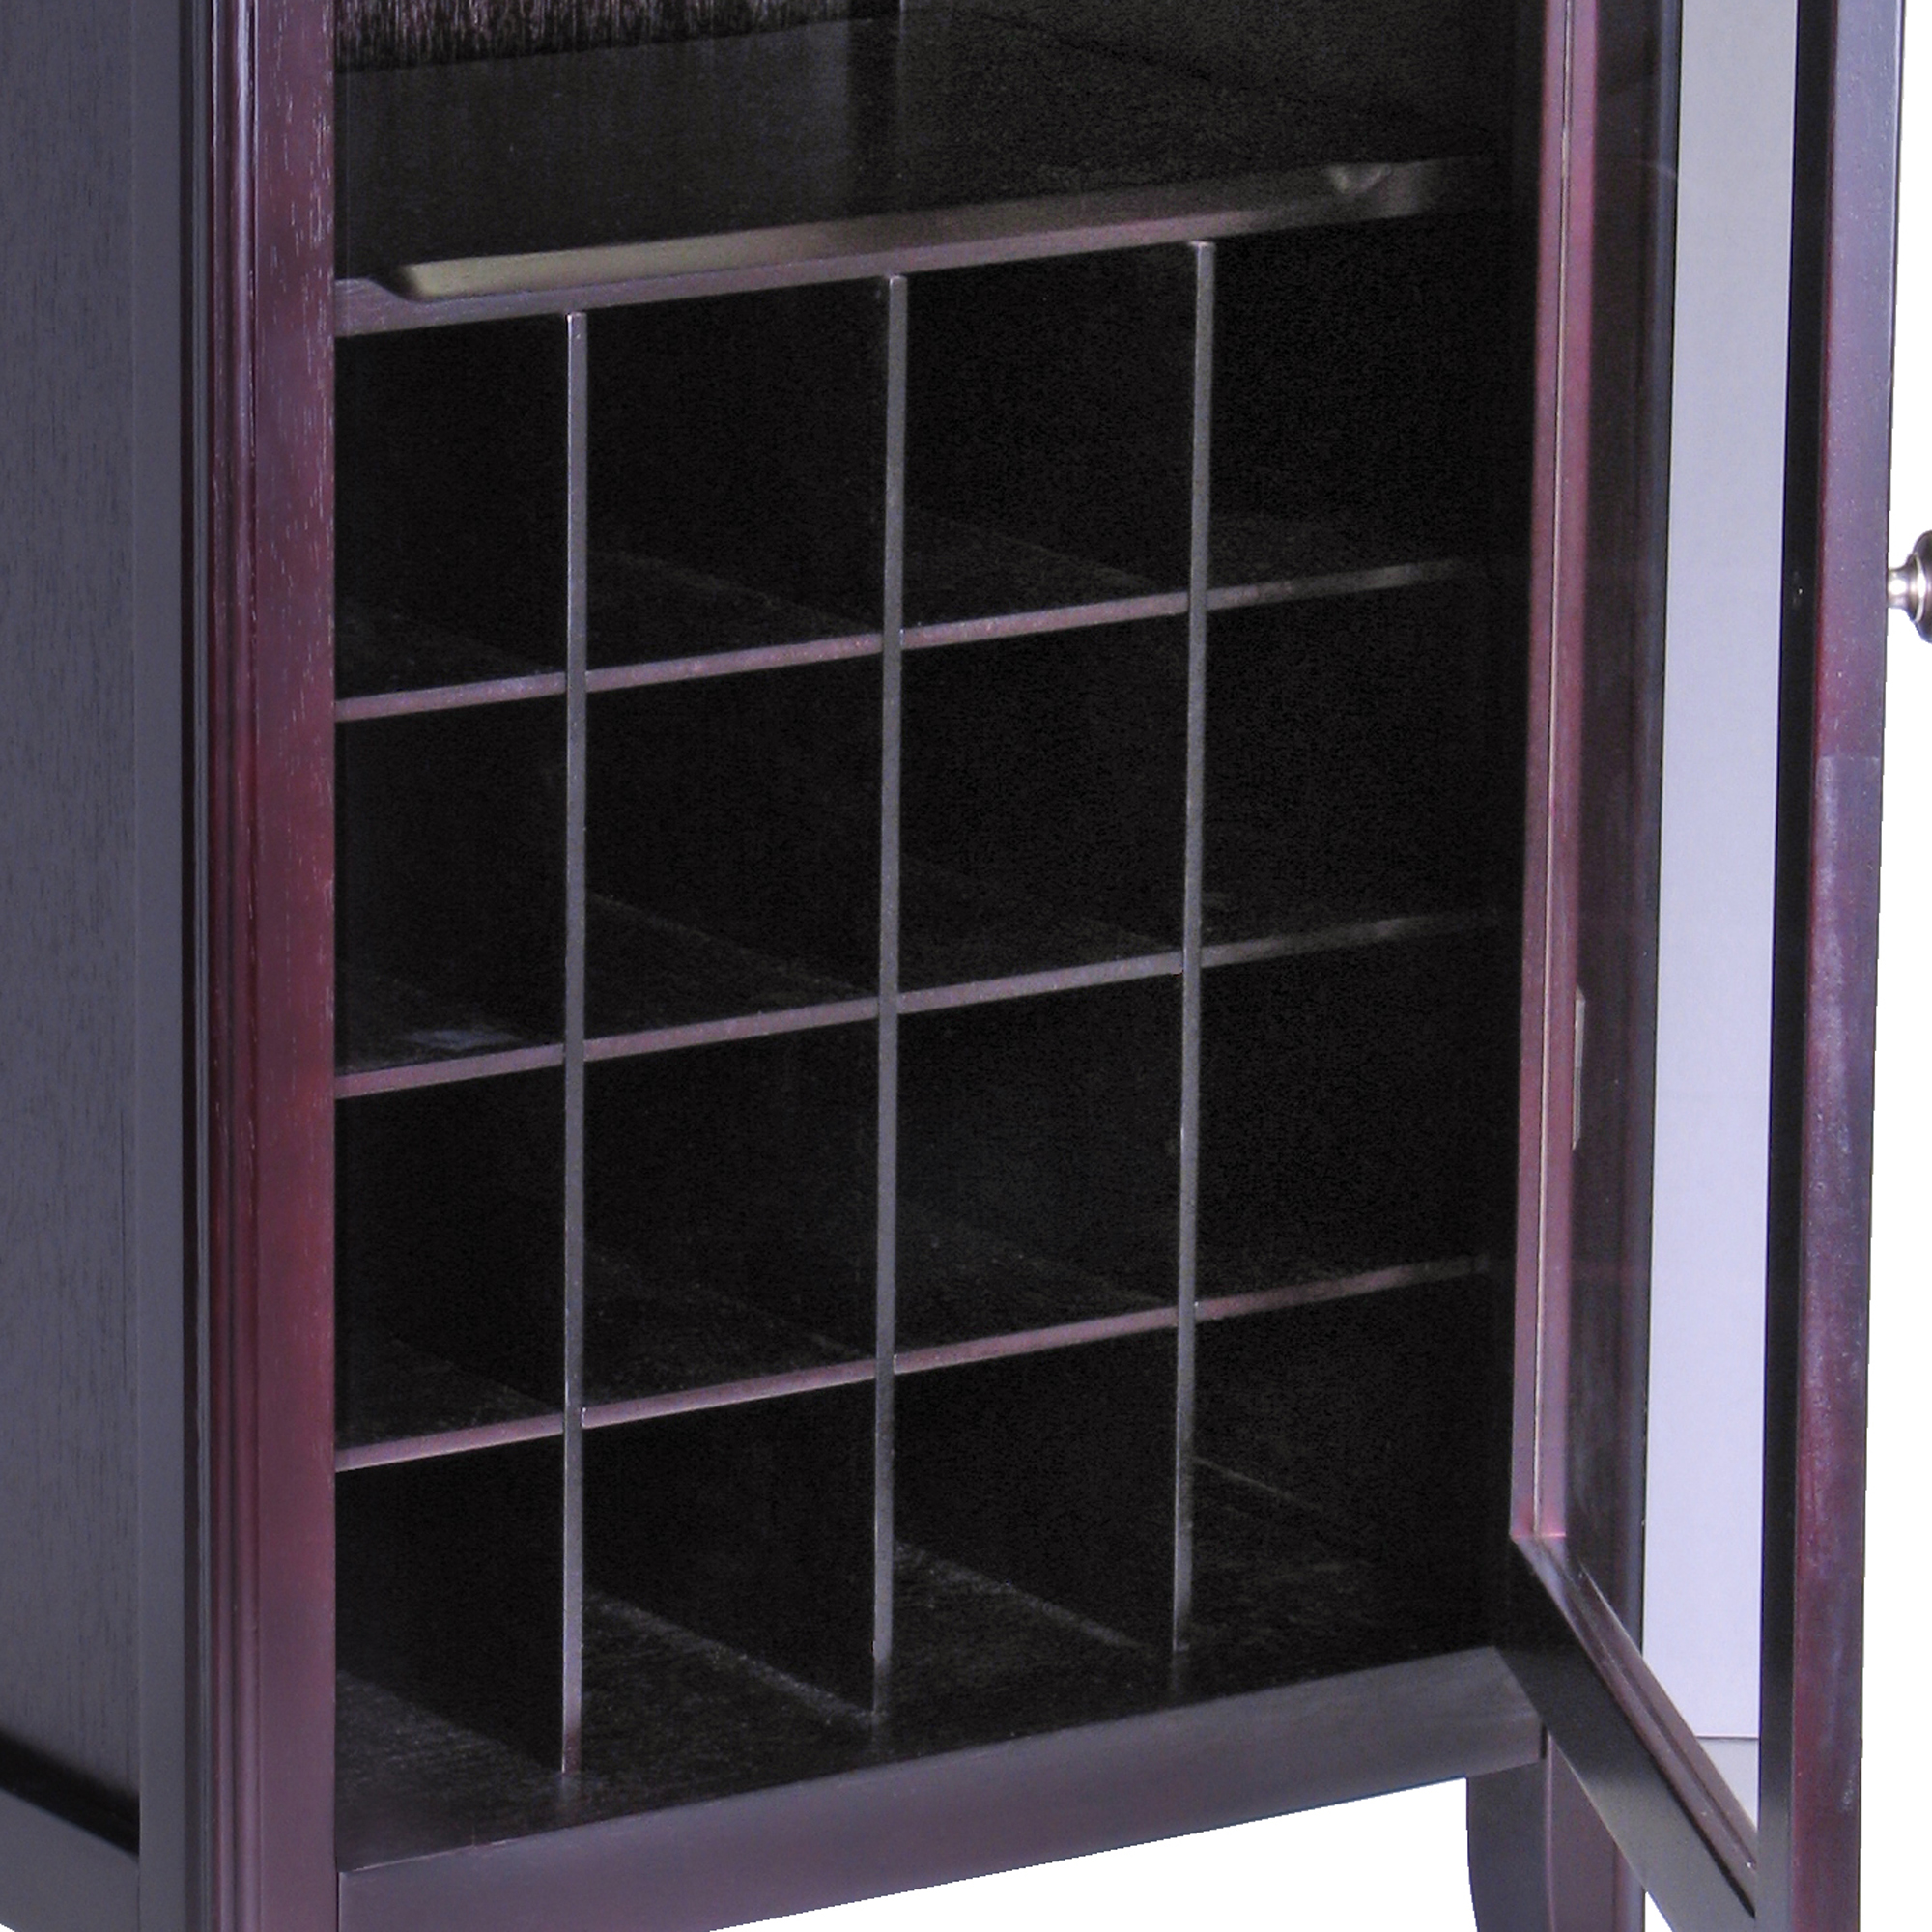 Winsome Wood Ryan 16-Bottle Wine Cabinet with Display Glass Door, Espresso Finish - image 4 of 5